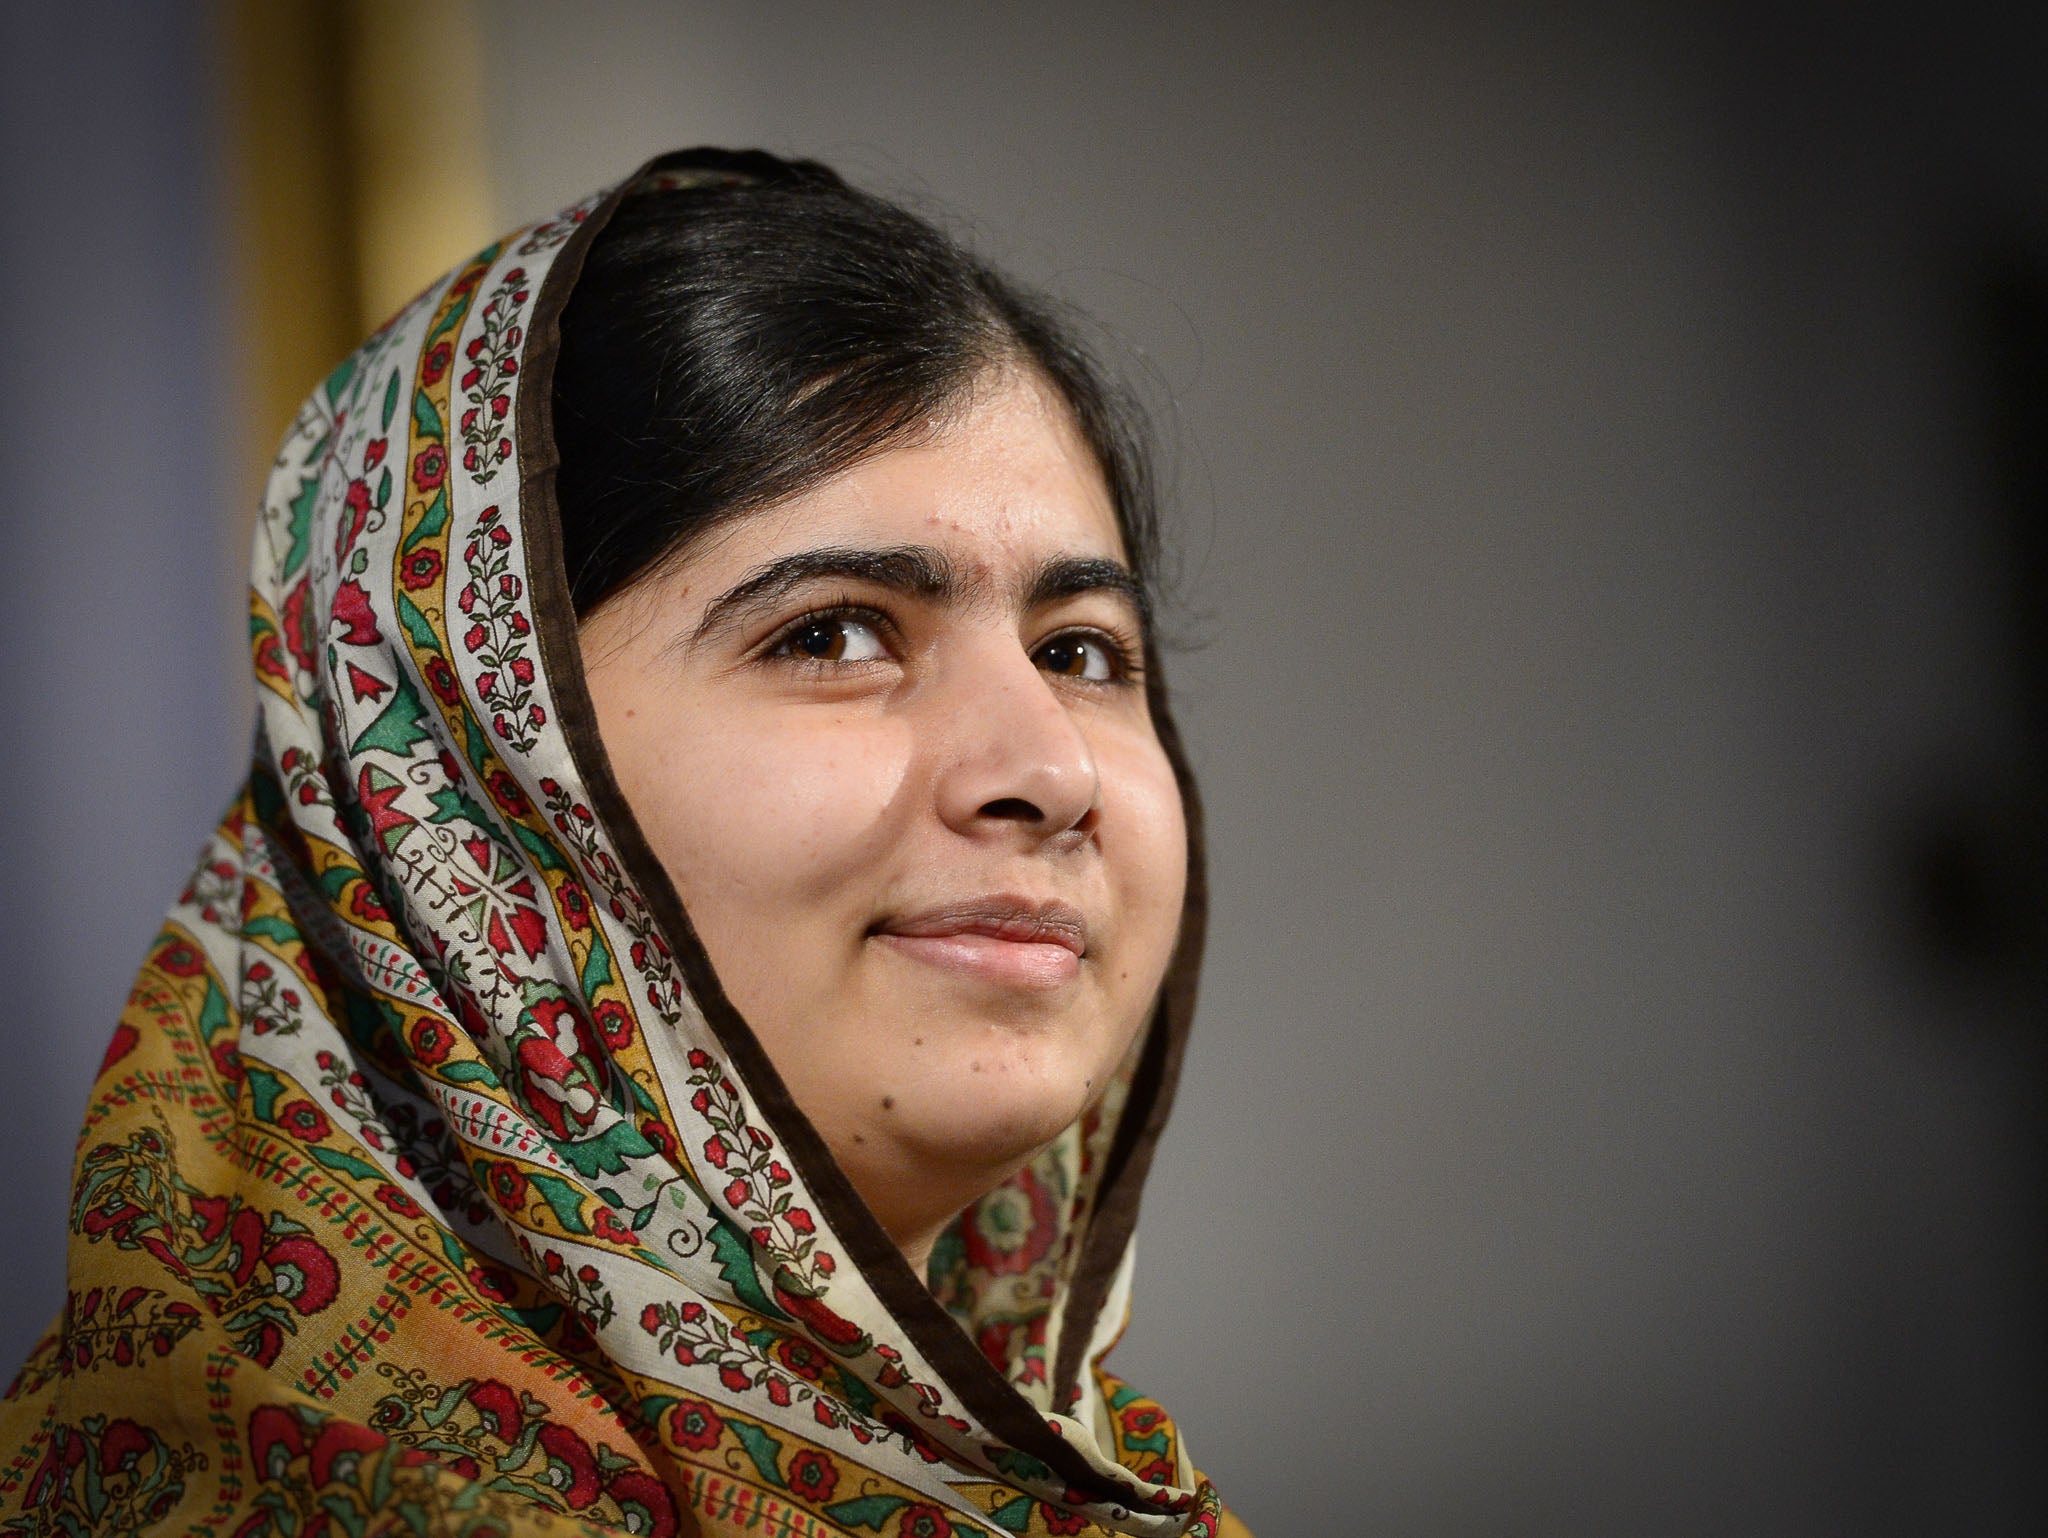 An asteroid has been named after Malala